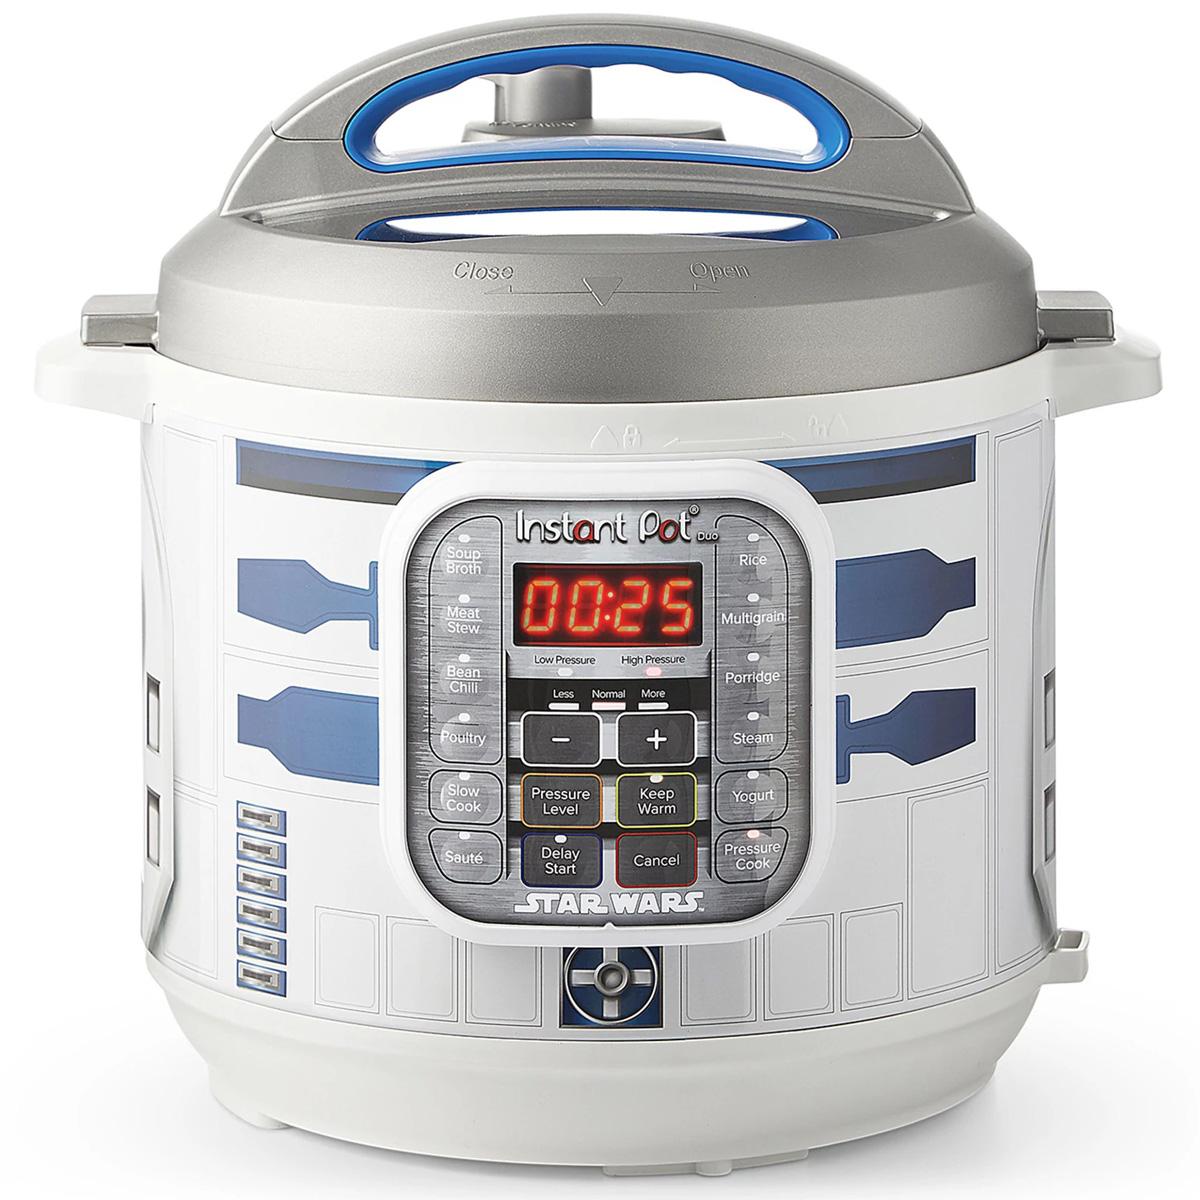 6Q Instant Pot Duo Star Wars Pressure Cooker Multicooker R2D2 for $35.99